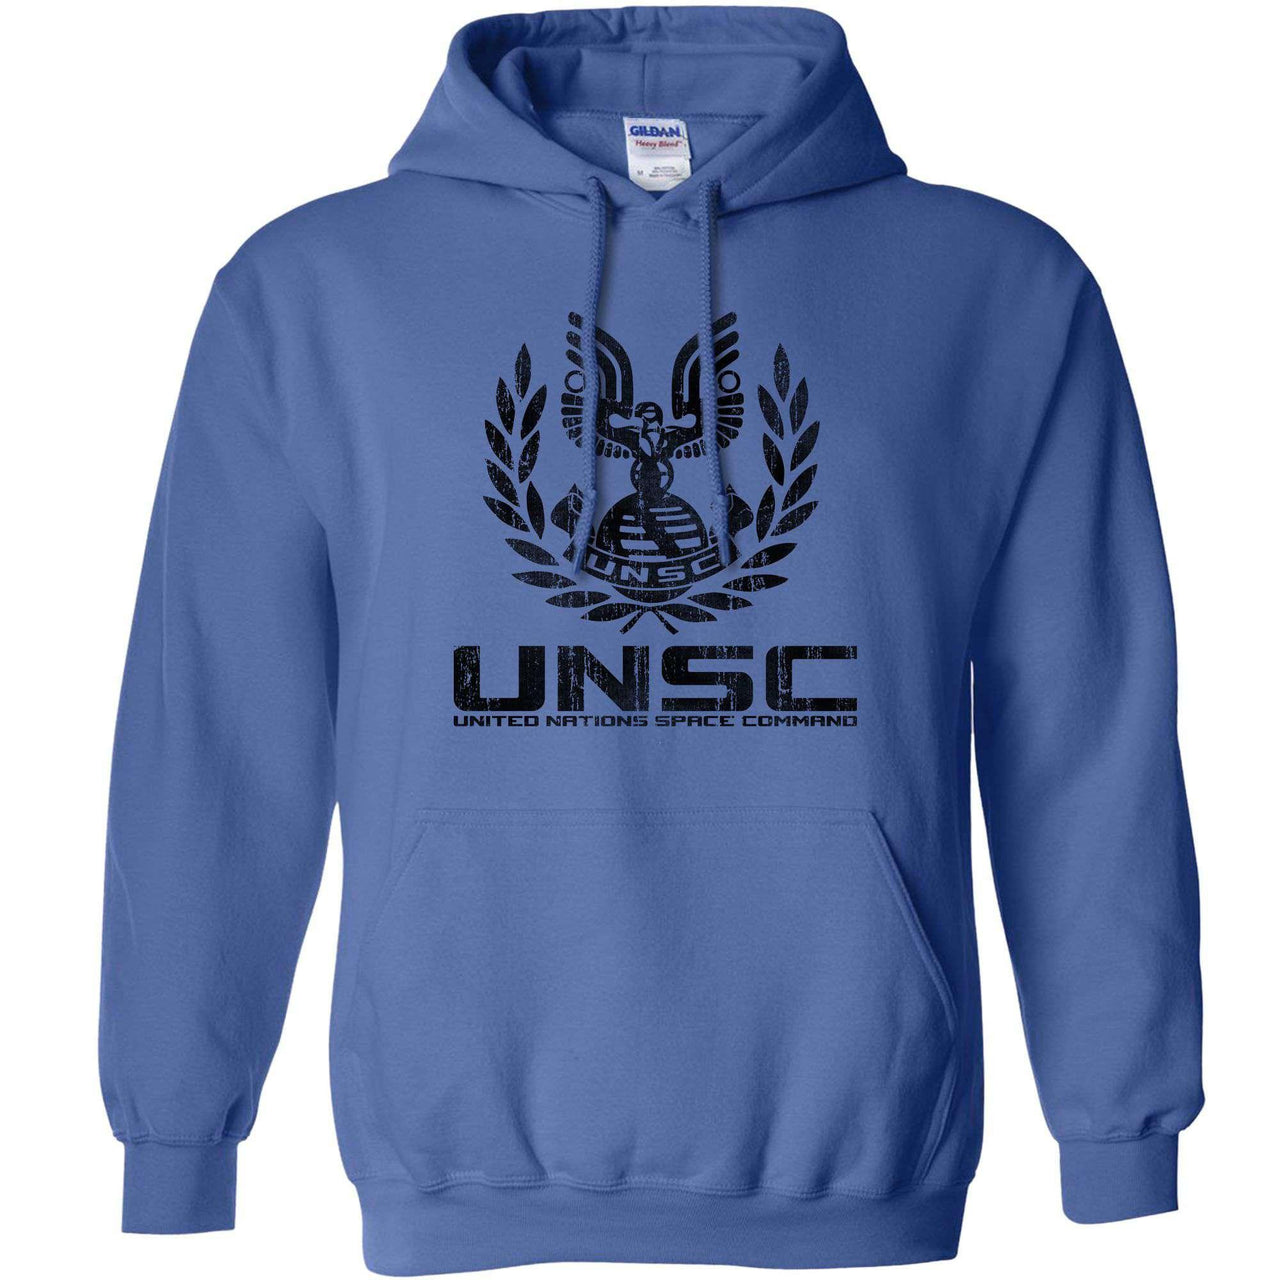 UNSC Graphic Hoodie 8Ball